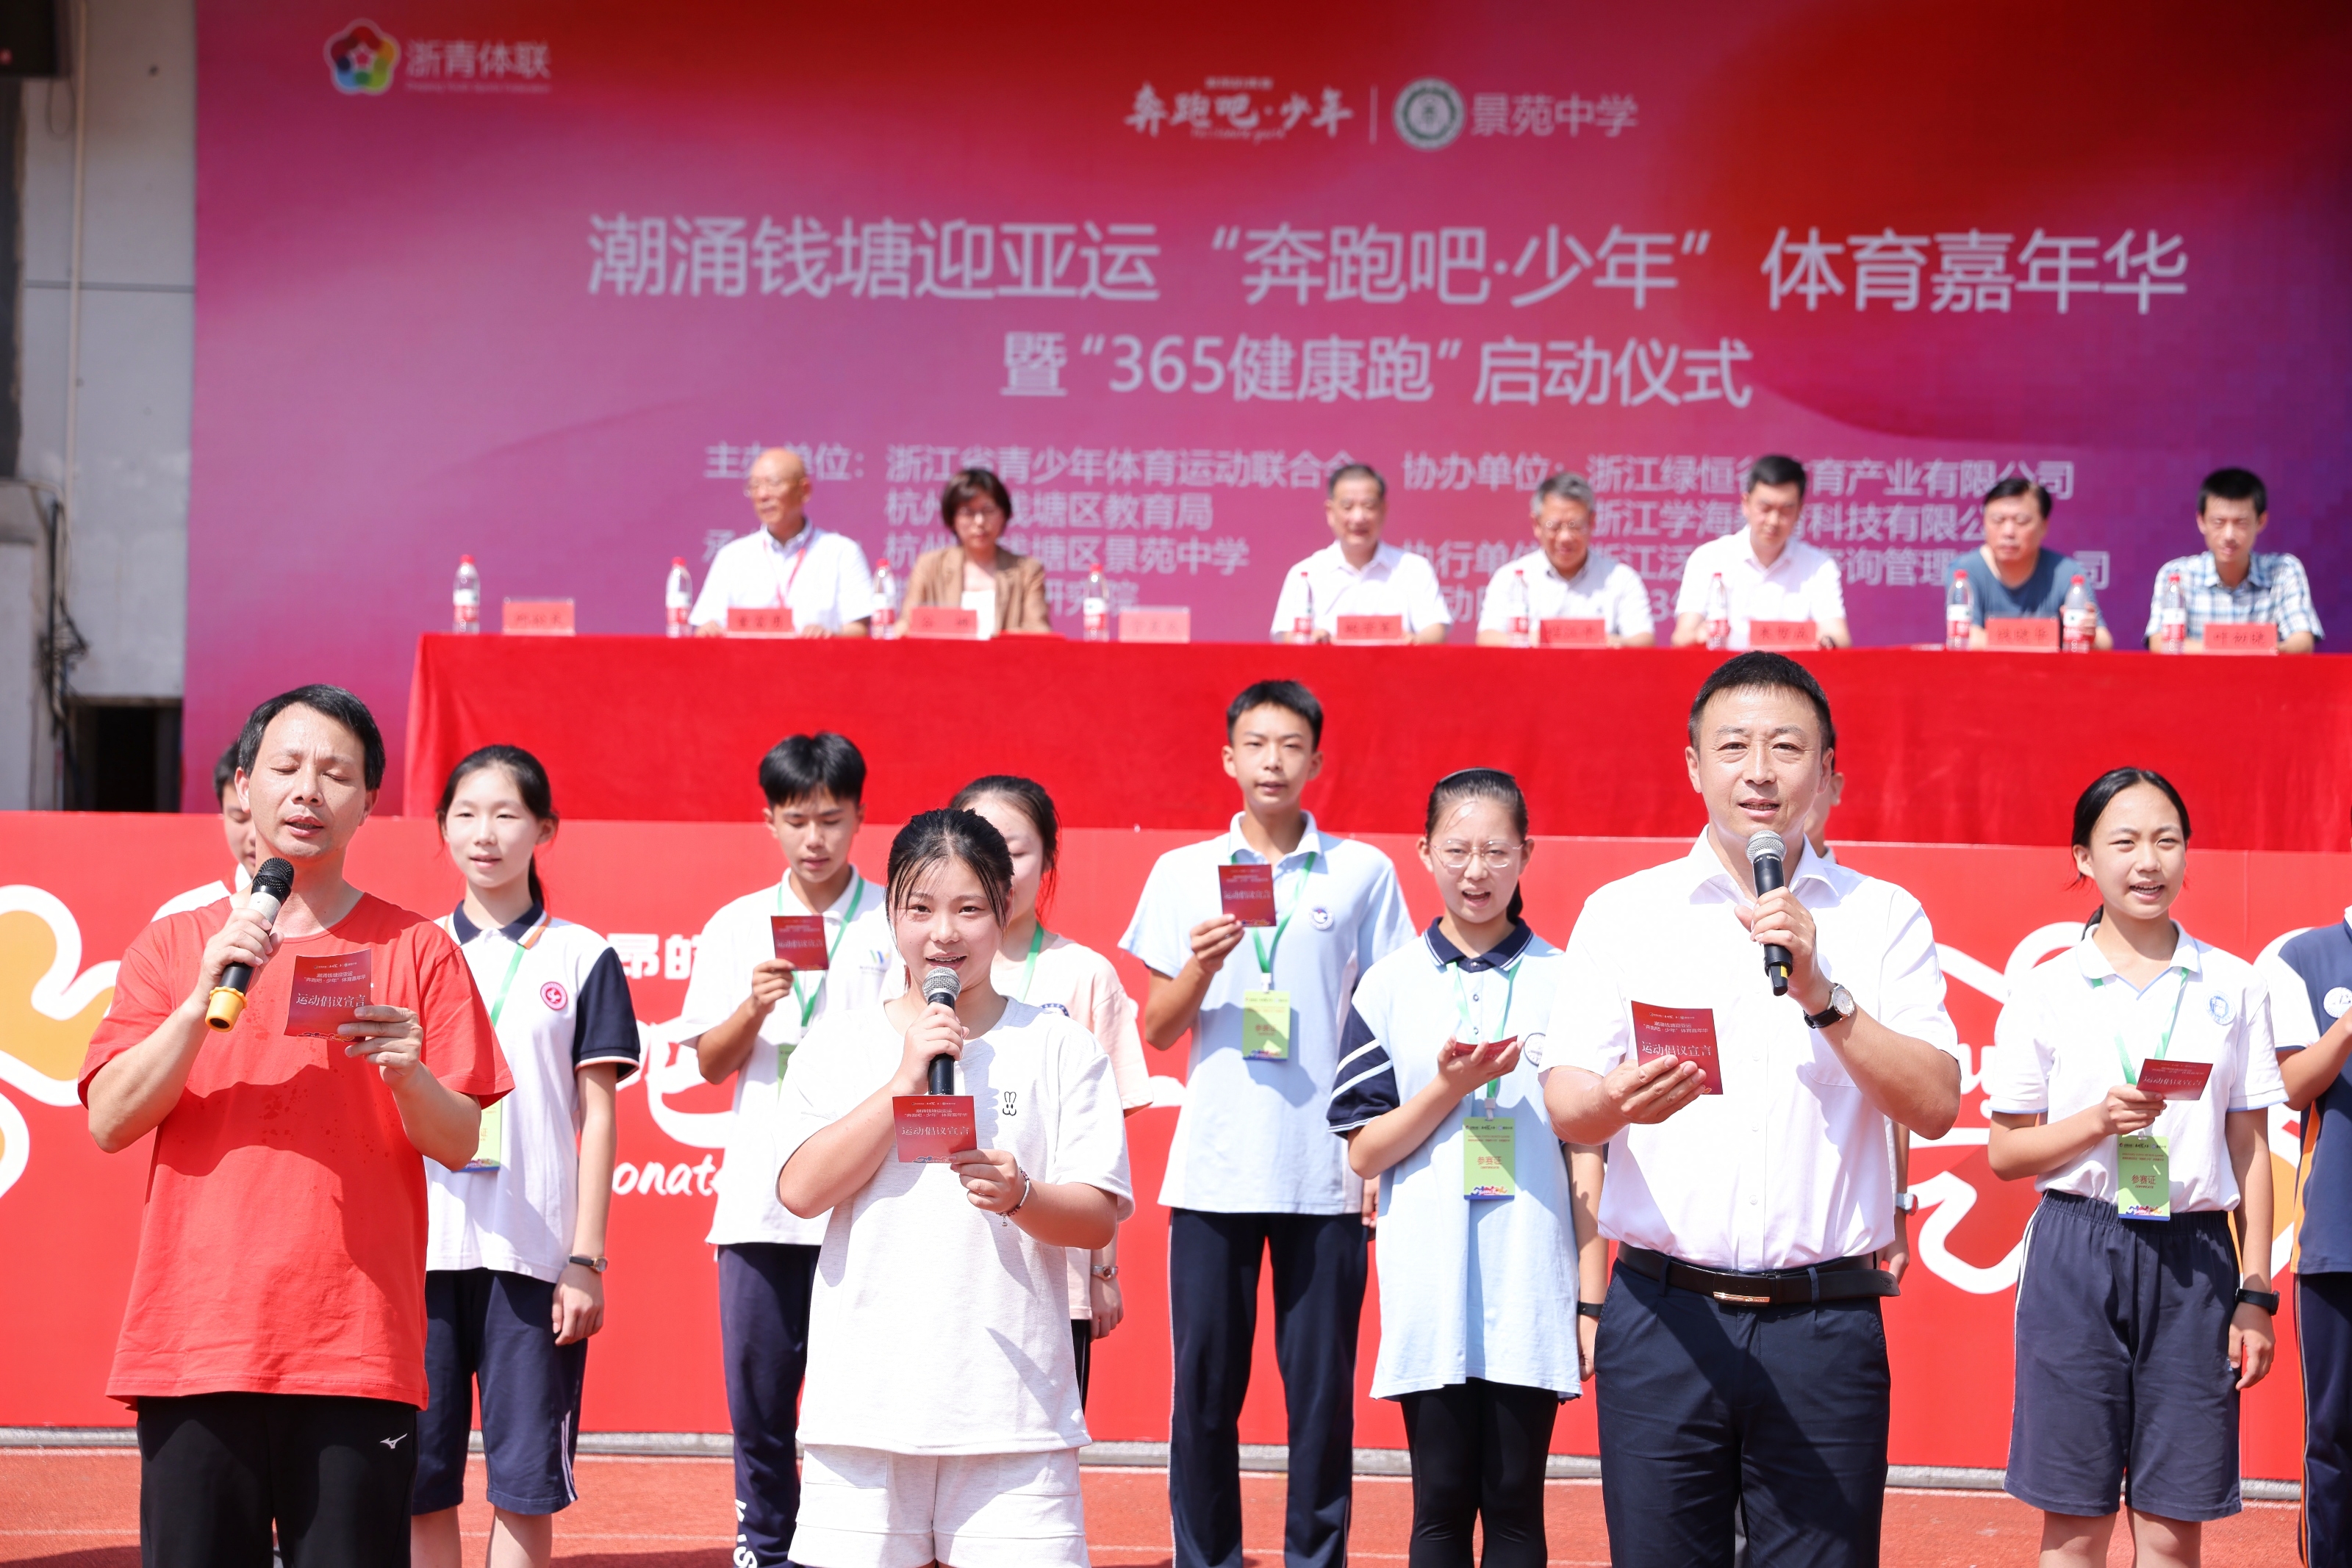 Green Valley co-organizes the "Run, Youth" sports carnival event in Qiantang to welcome the Asian Games